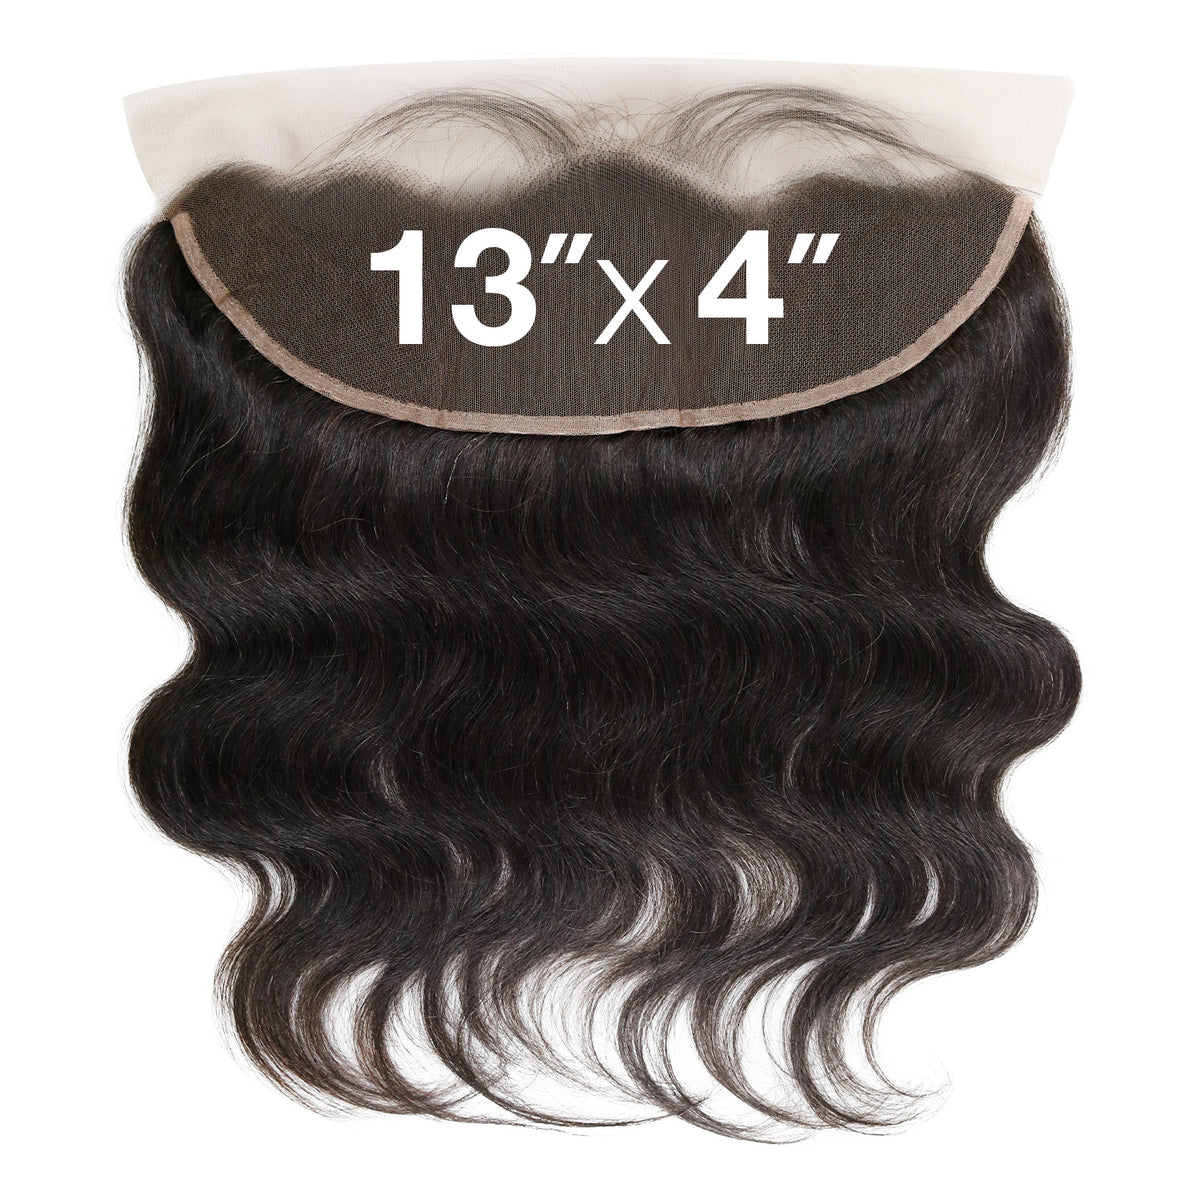 Unprocessed Brazilian Remy Human Hair Hand-Tied 13X4 Frontal Closure Body Wave